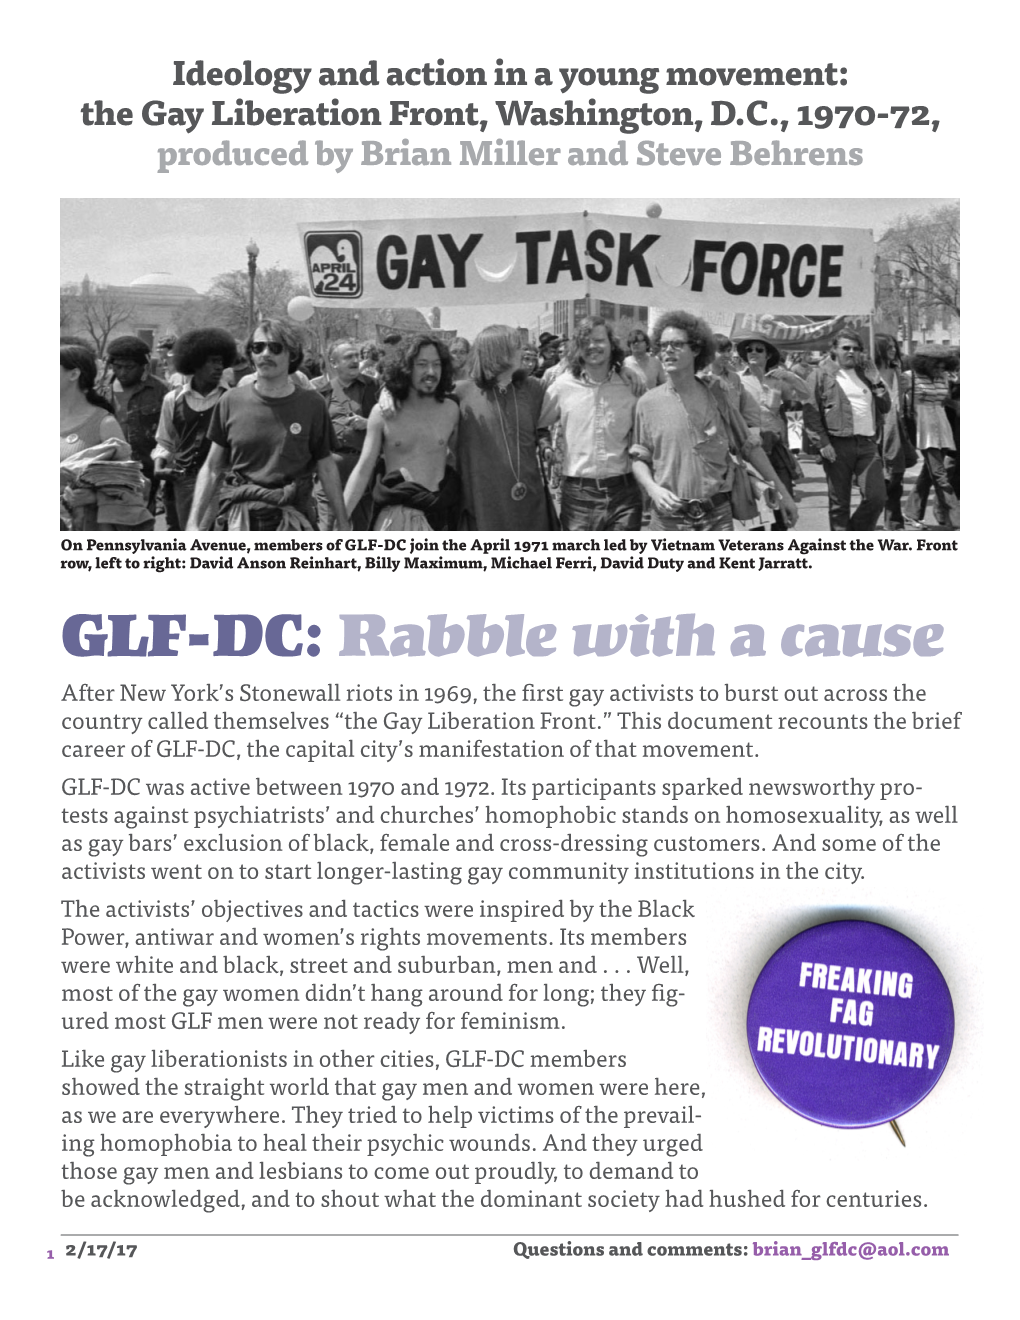 GLF-DC Join the April 1971 March Led by Vietnam Veterans Against the War